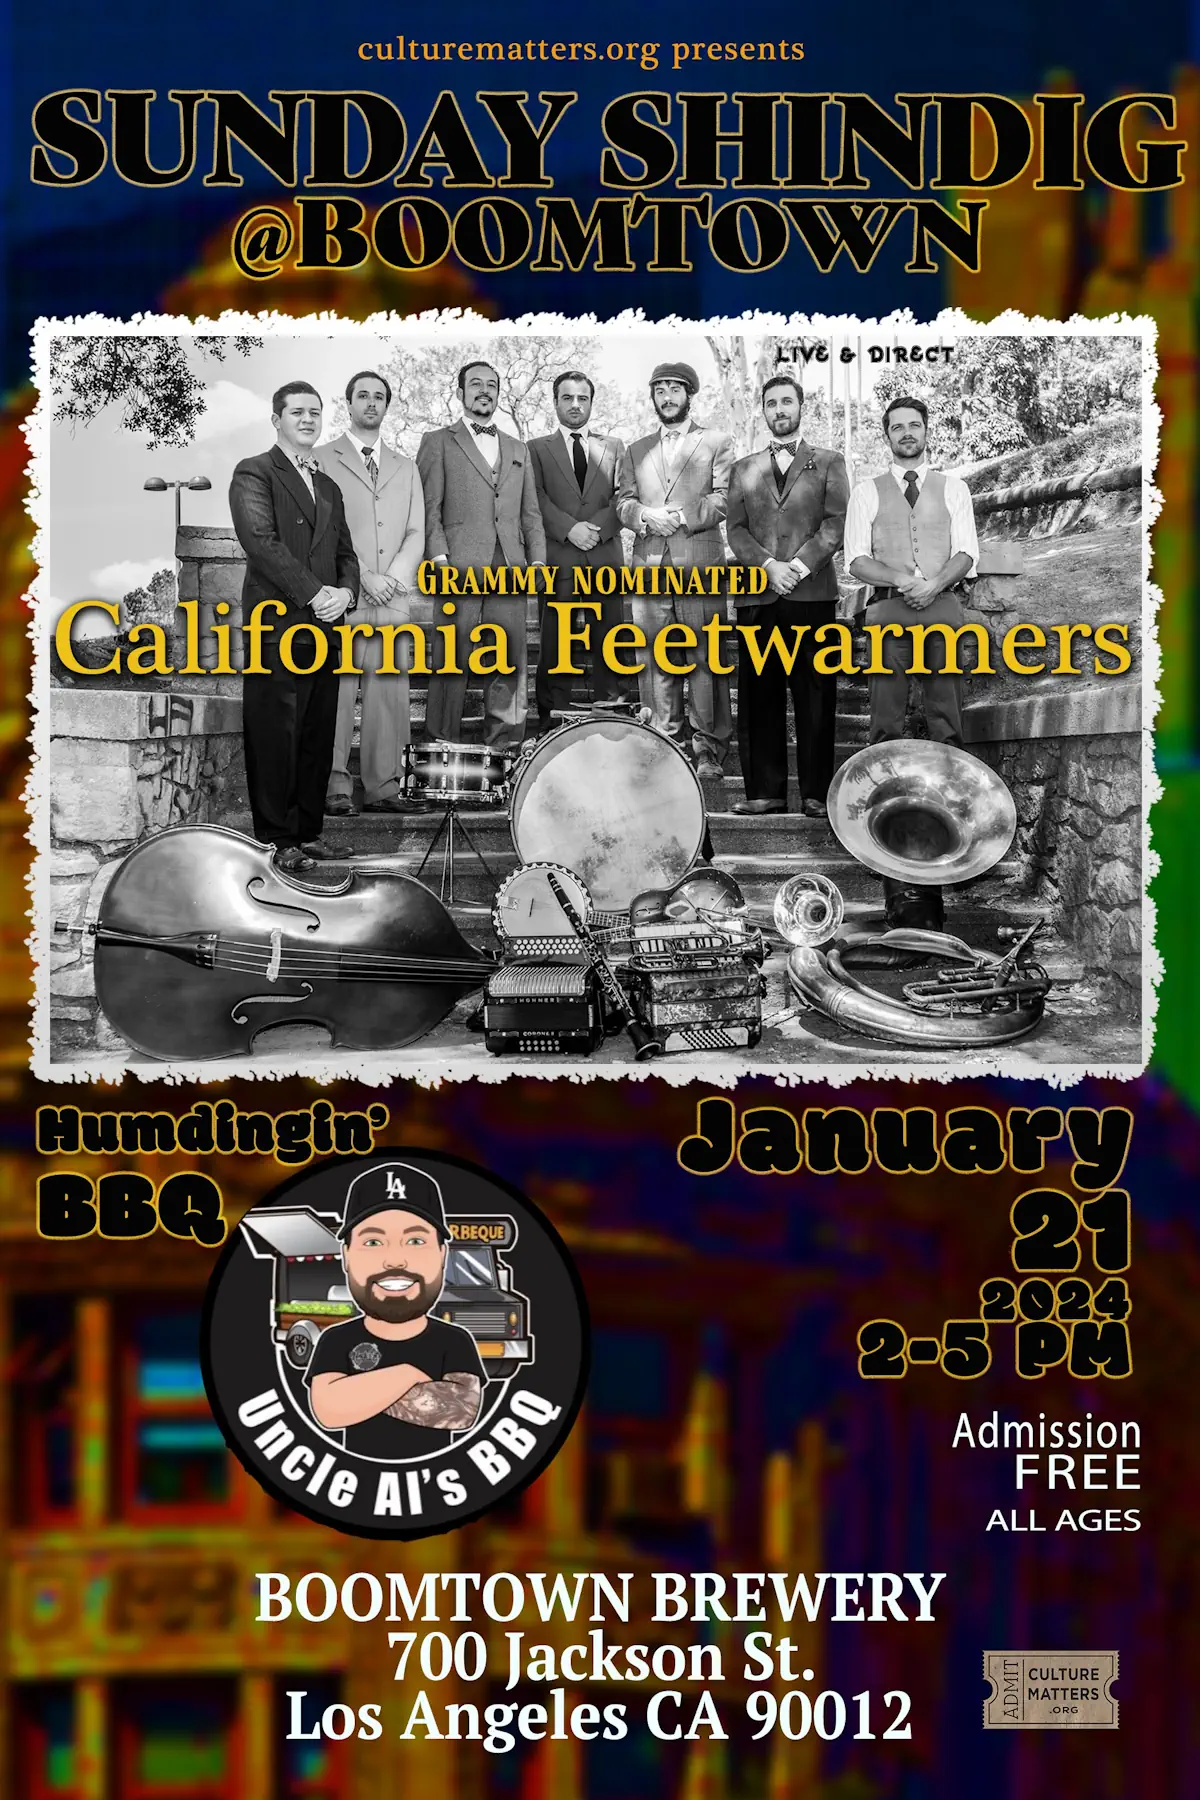 California Feetwarmers at Boomtown Brewery!